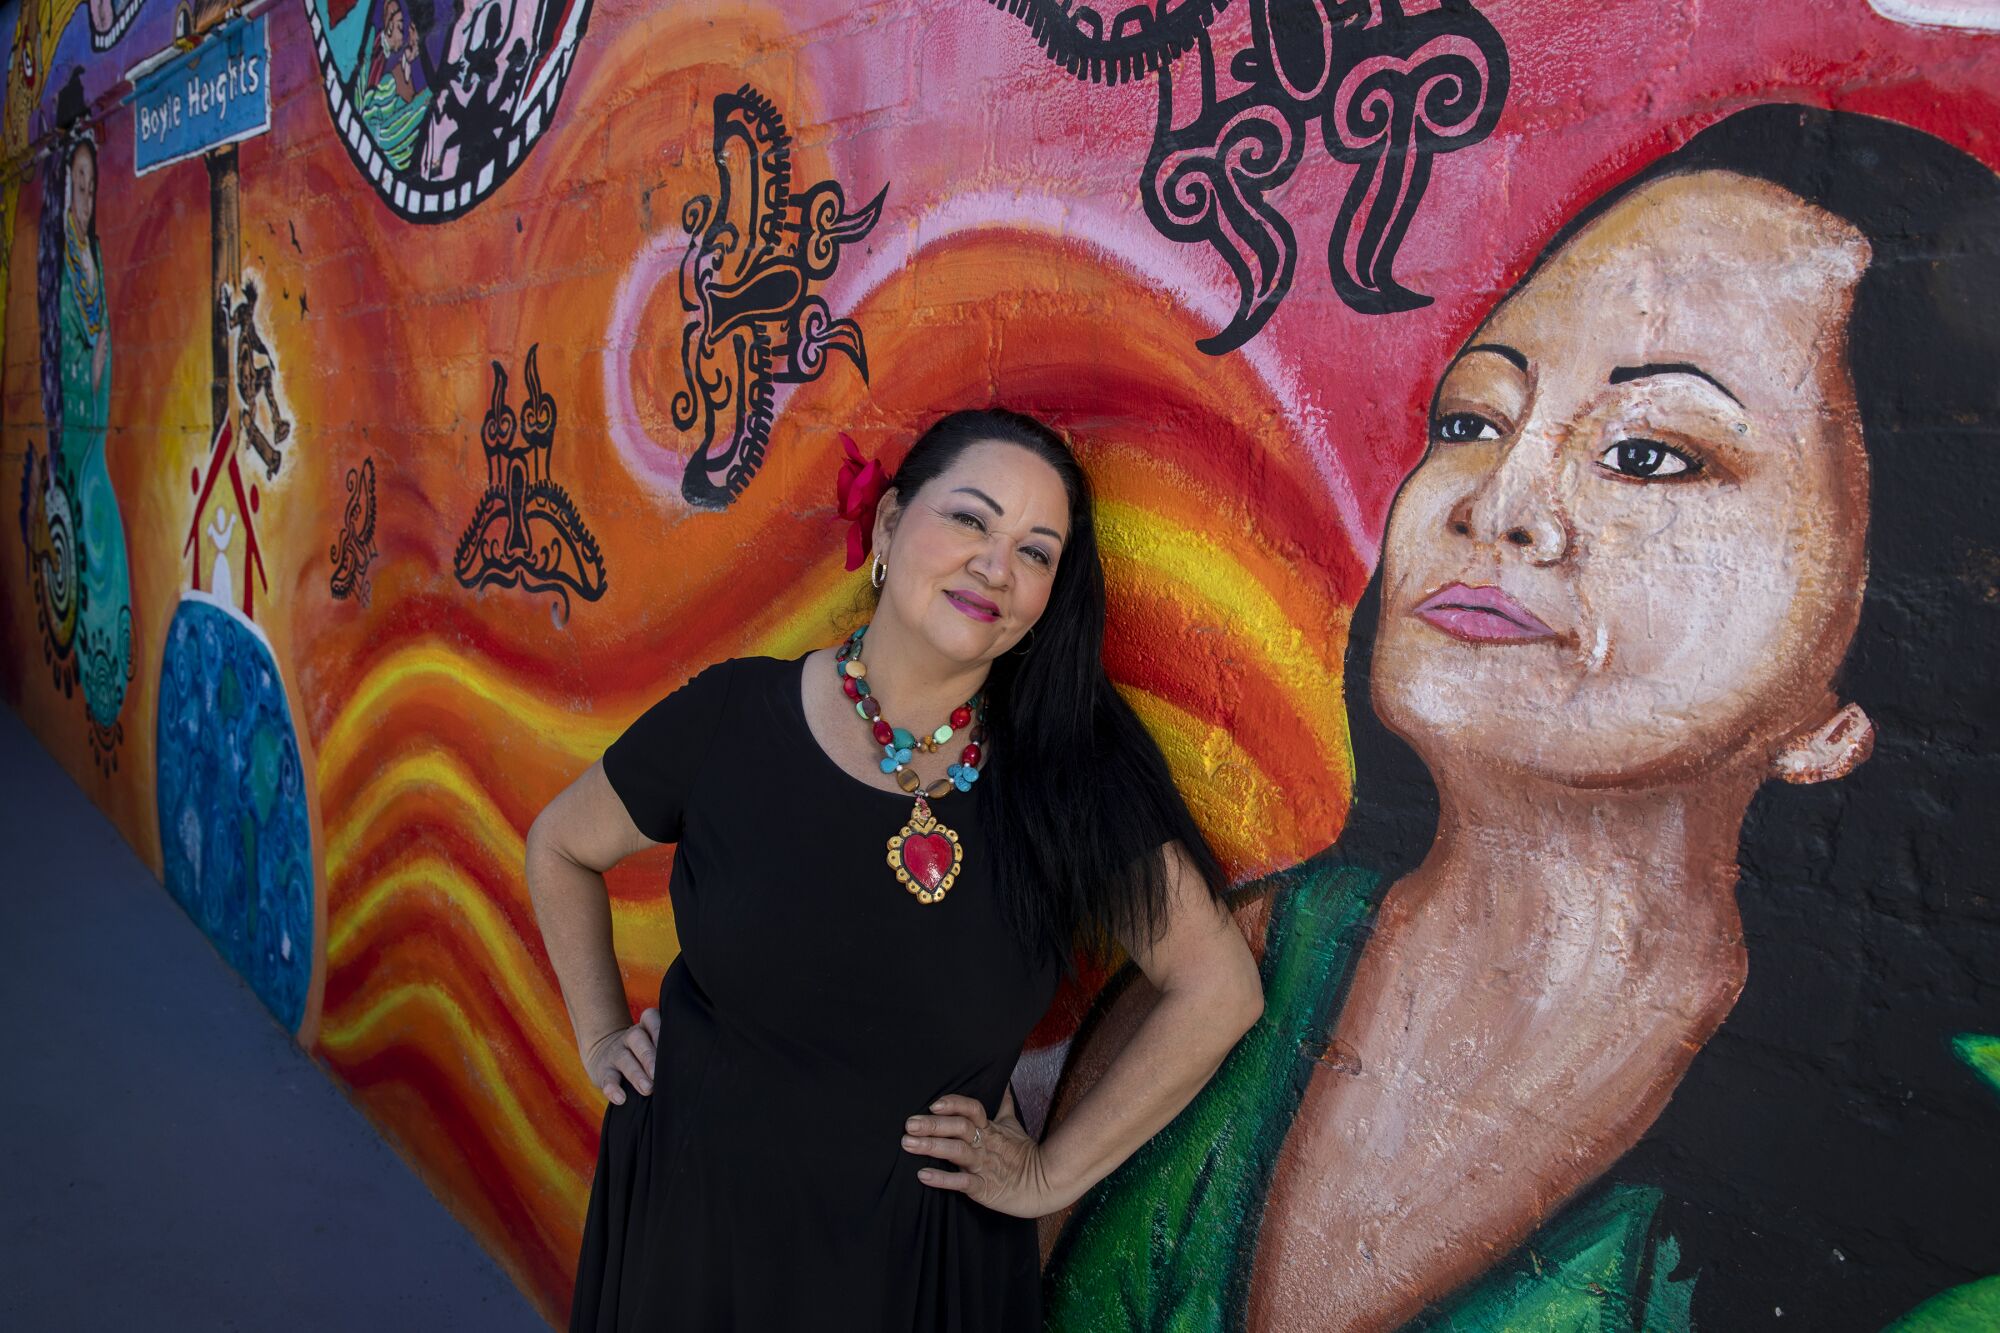 Founding artistic director Josefina Lopez sits outside Casa 0101 with a mural of herself July 31, 2021 in Boyle Heights